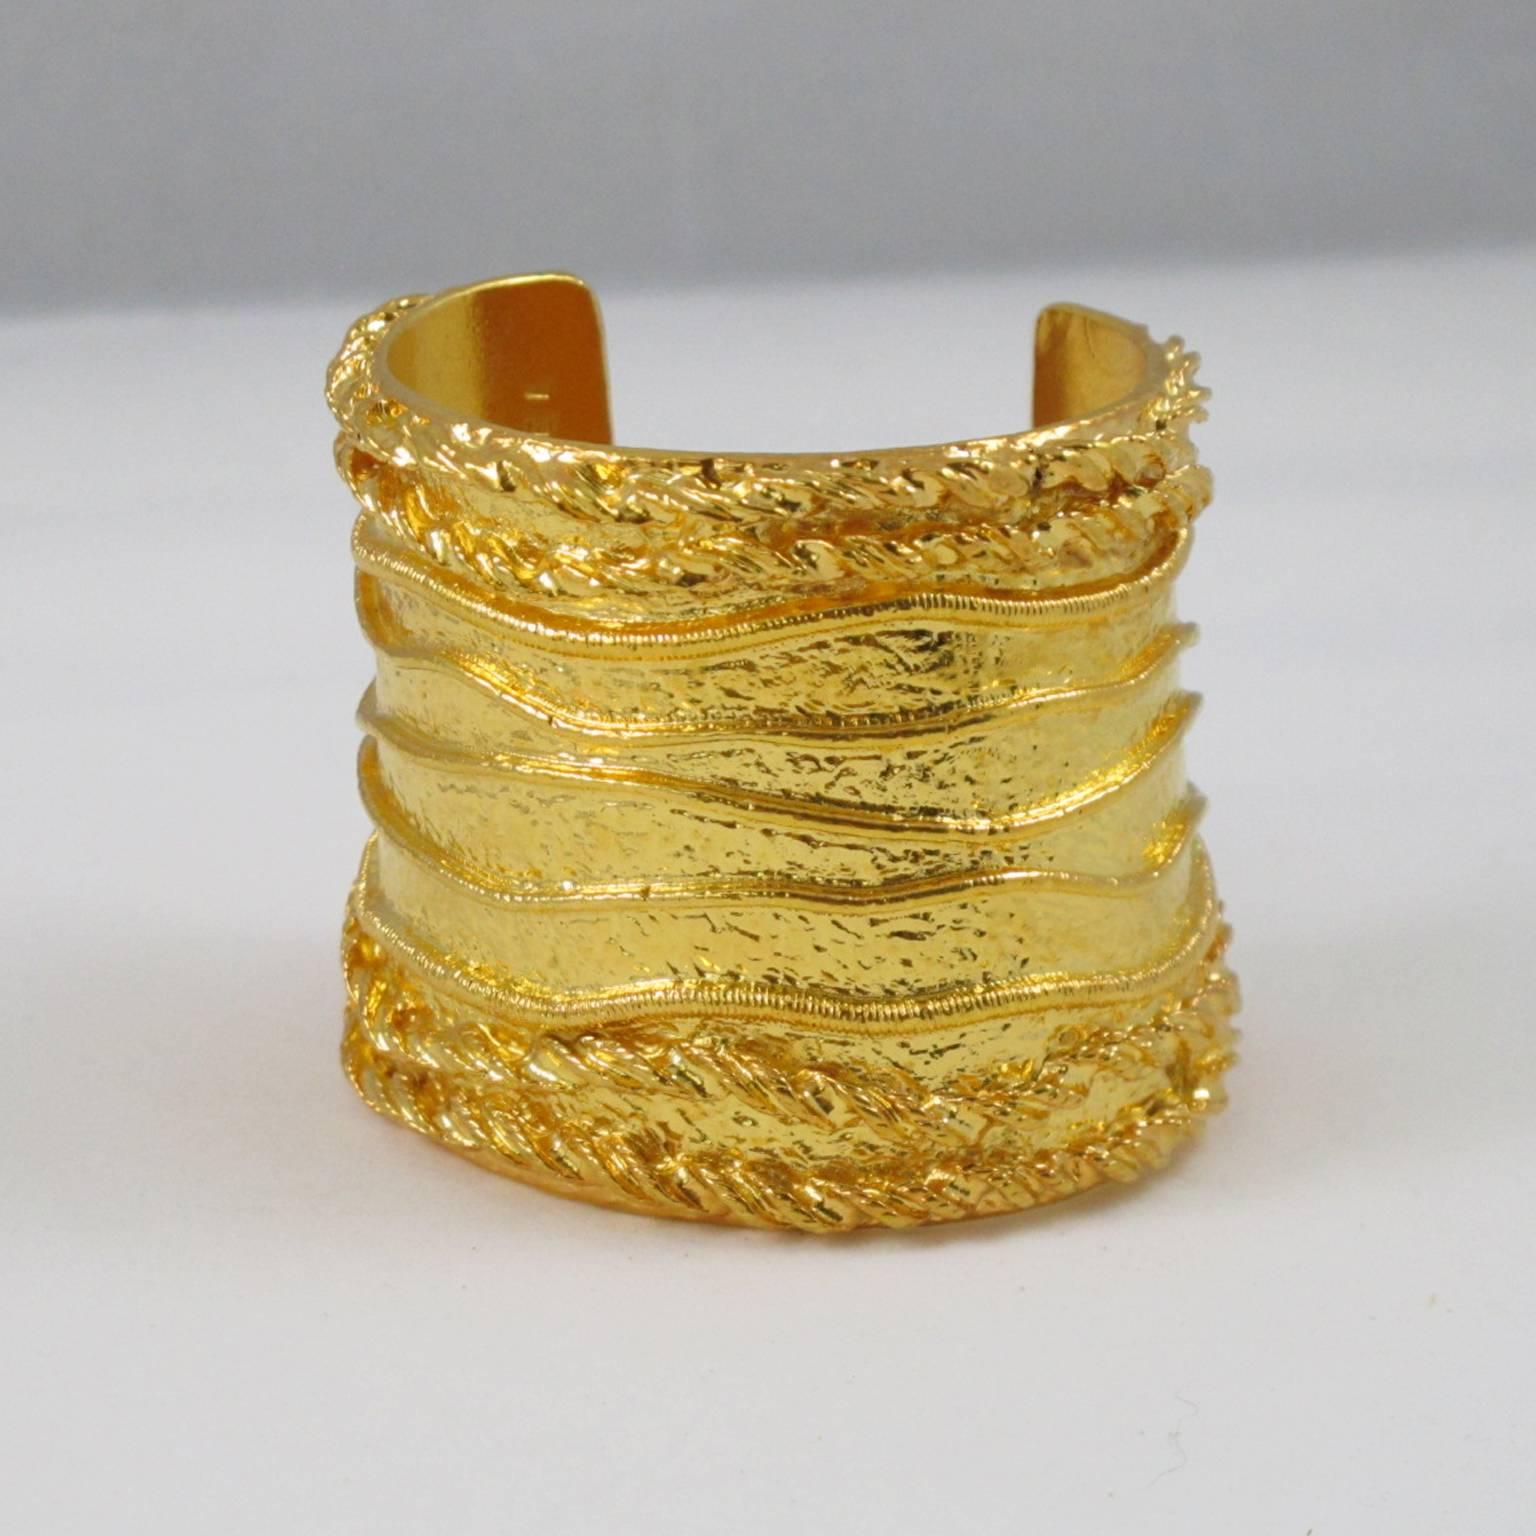 SONIA RYKIEL Paris signed Cuff Bracelet. Massive baroque slave shape with gilt metal all textured and carved. Signed by famous French Jewel and Fashion Designer Sonia Rykiel: "Inscription Rykiel" engraved inside. (The label